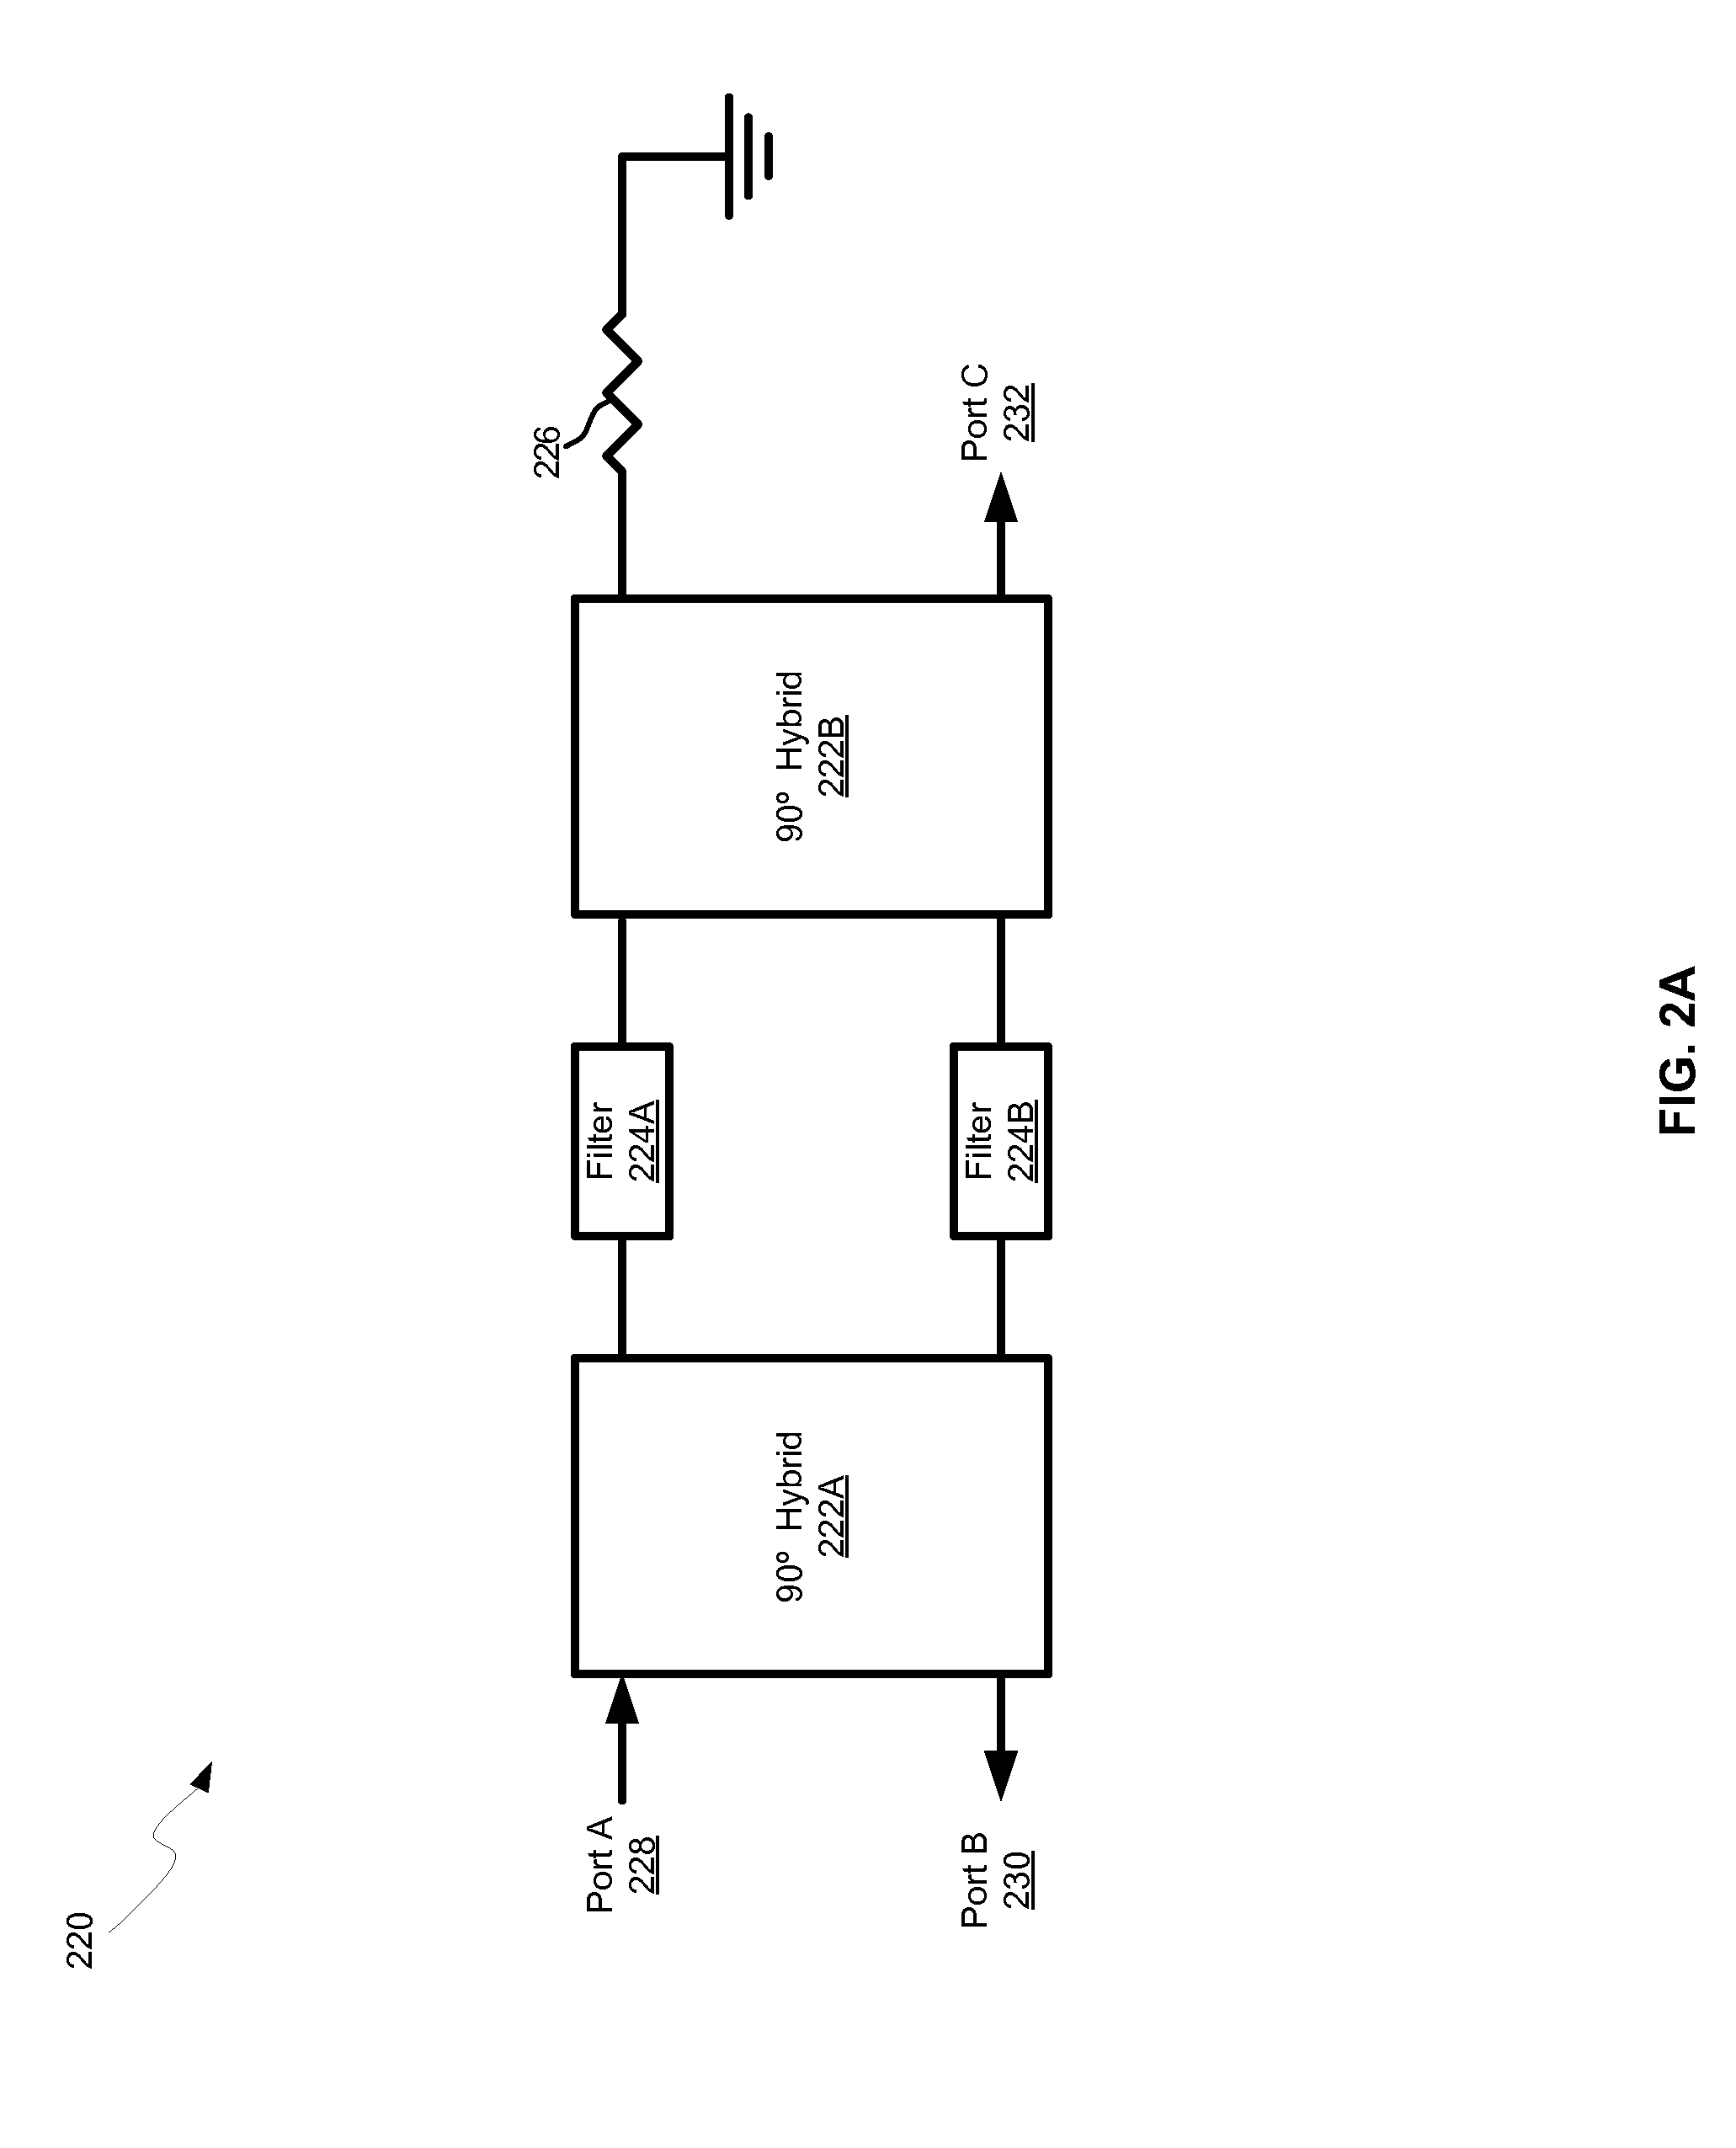 Method and system for processing signals via diplexers embedded in an integrated circuit package